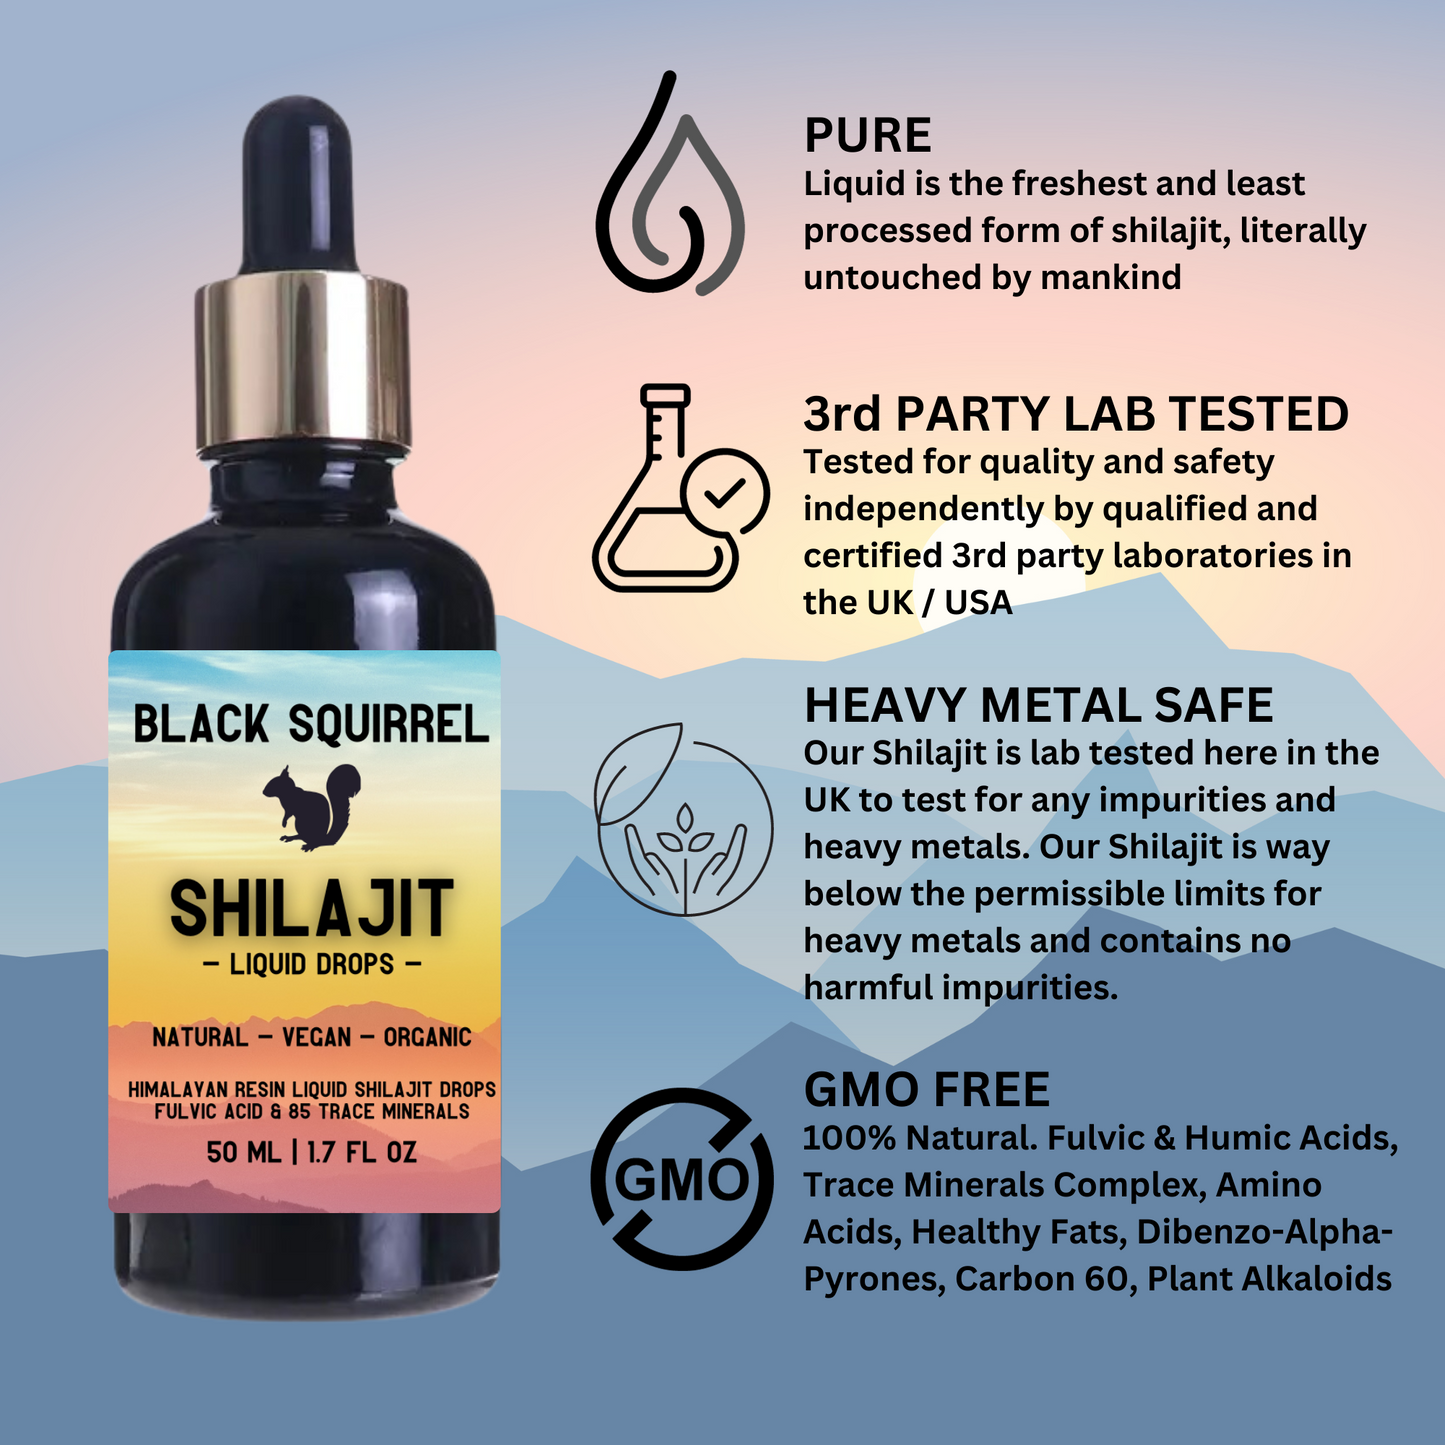 Buy Black Squirrel Shilajit. Pure, Potent, Himalayan Liquid Drops 50ml - Black Squirrel Pure Potent Shilajit. High Strength, Himalayan Liquid Drops 50ml with Dropper. Authentic, Fulvic Acid & Natural Trace Mineral Complex. Organic & Vegan. A vegan-friendly, gluten-free, non-GMO, all natural & contains no artificial ingredients. It's loaded with more than 85 essential minerals & humic / fulvic acids, it helps with altitude sickness & boosts cognitive abilities. It also reduces inflammation, strengthens the i